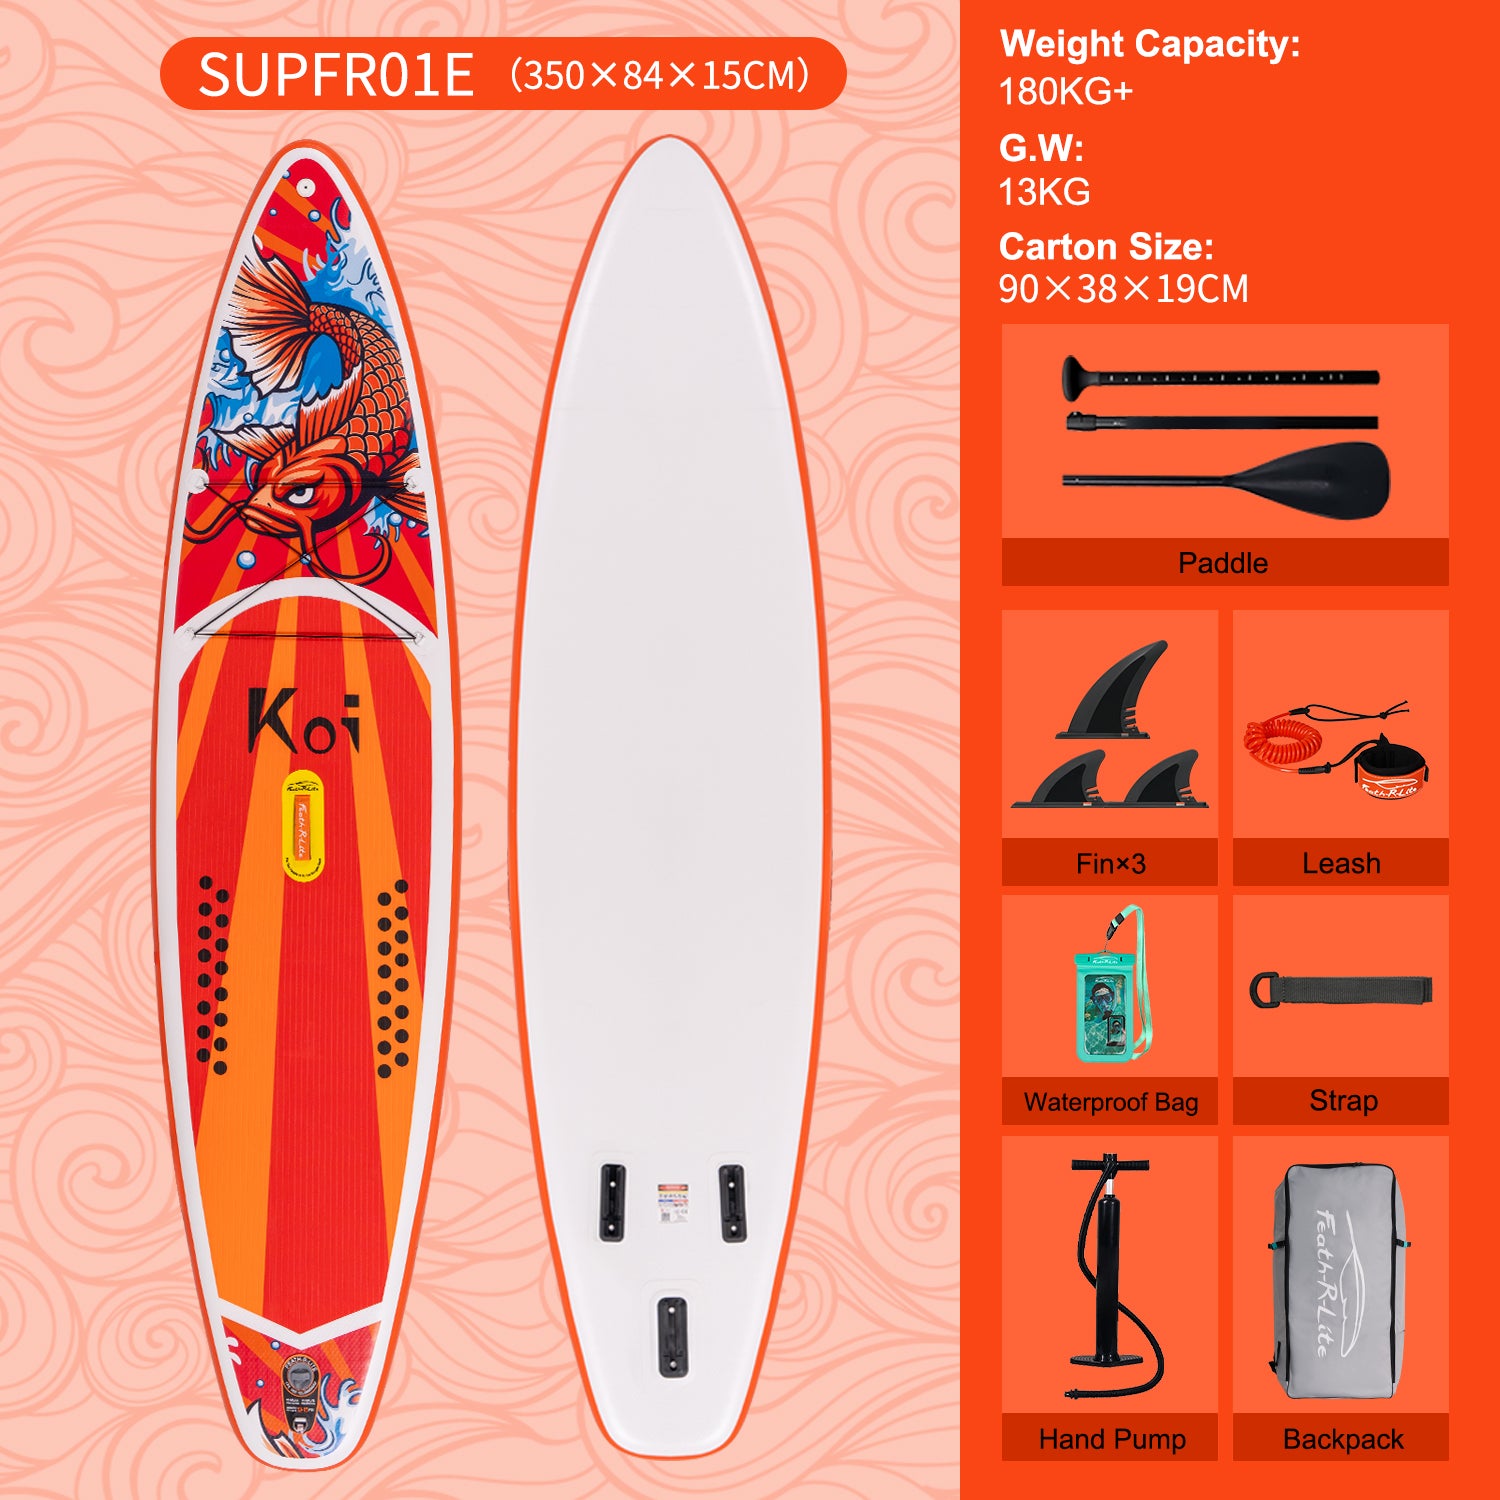 Funwater KOI 11′6″ LIGHTWEIGHT INFLATABLE STAND UP PADDLE BOARD